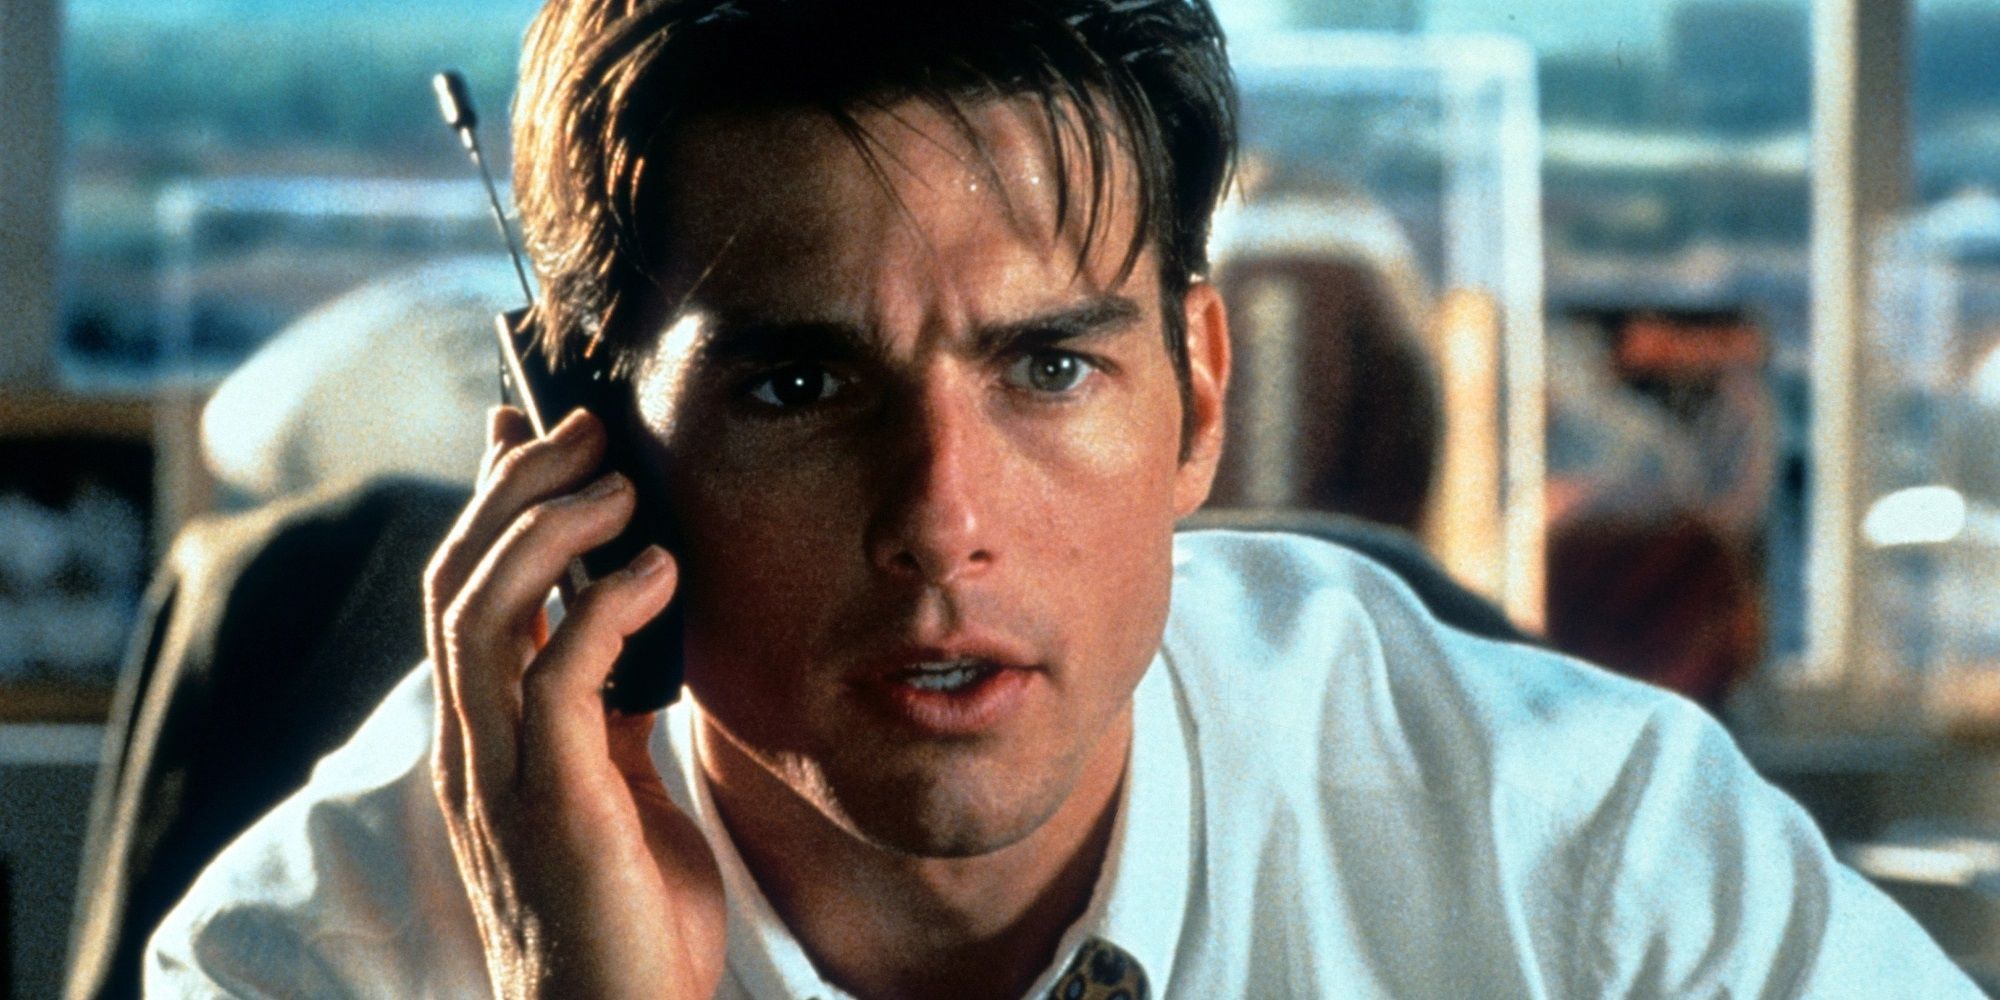 Tom Cruise speaks on the phone in Jerry Maguire.